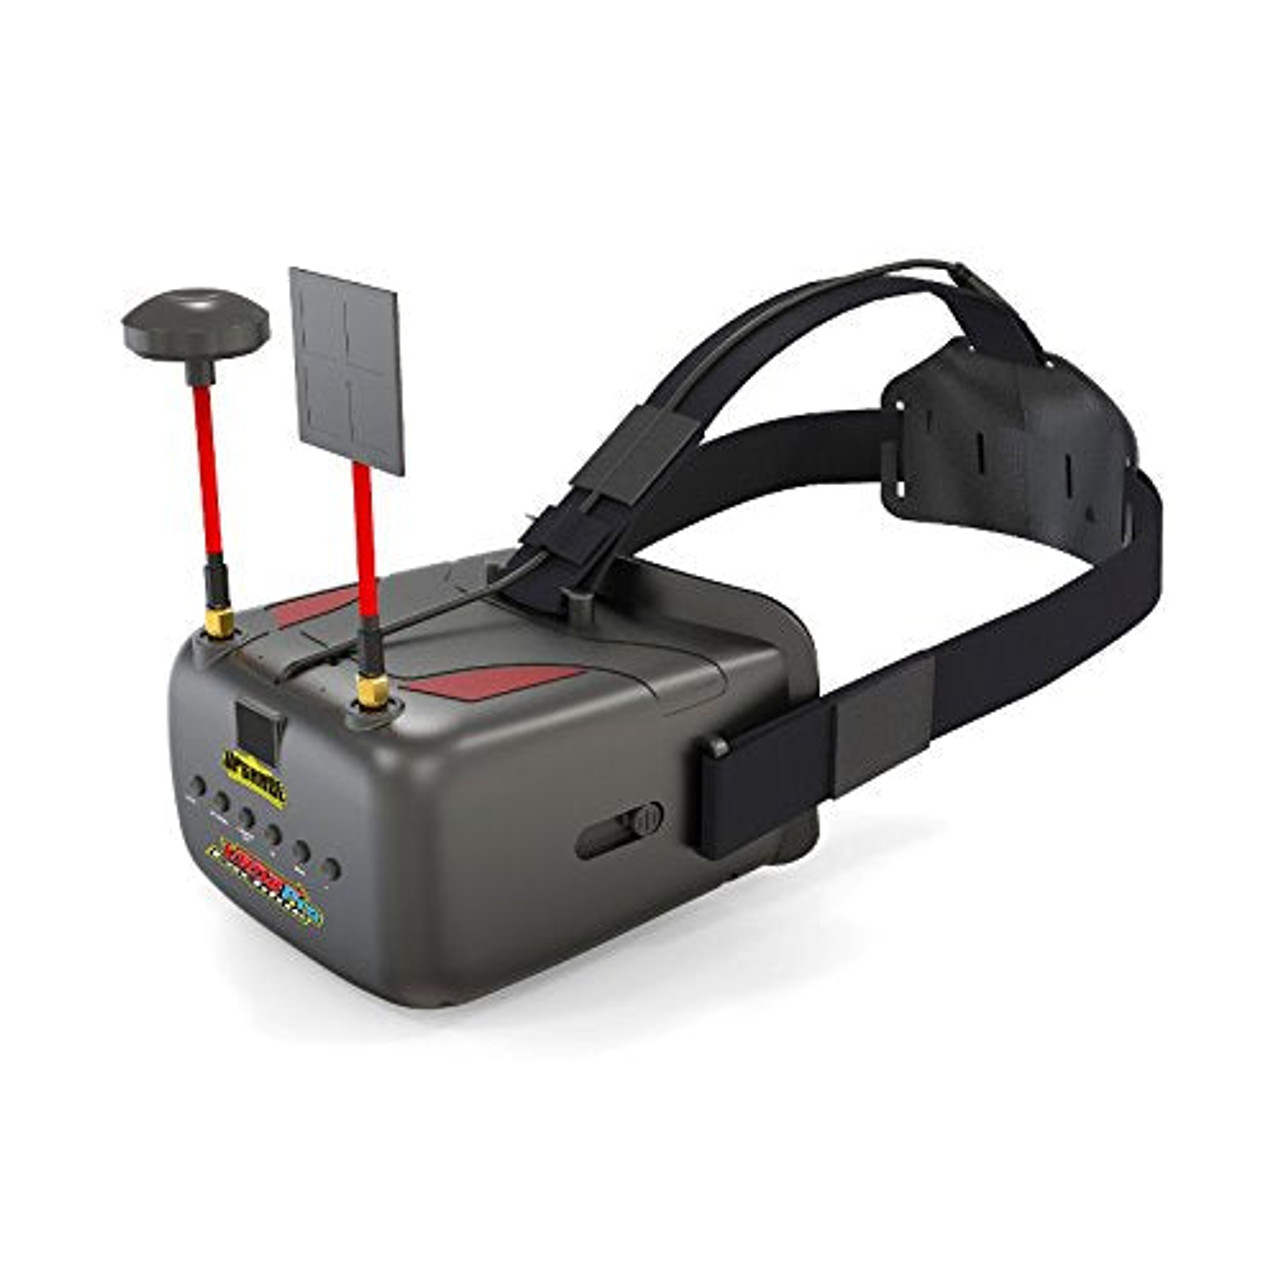 EACHINE VR D2 Pro FPV w/ DVR 5 Inches 40CH 5.8G Diversity Headset - Wires Computing